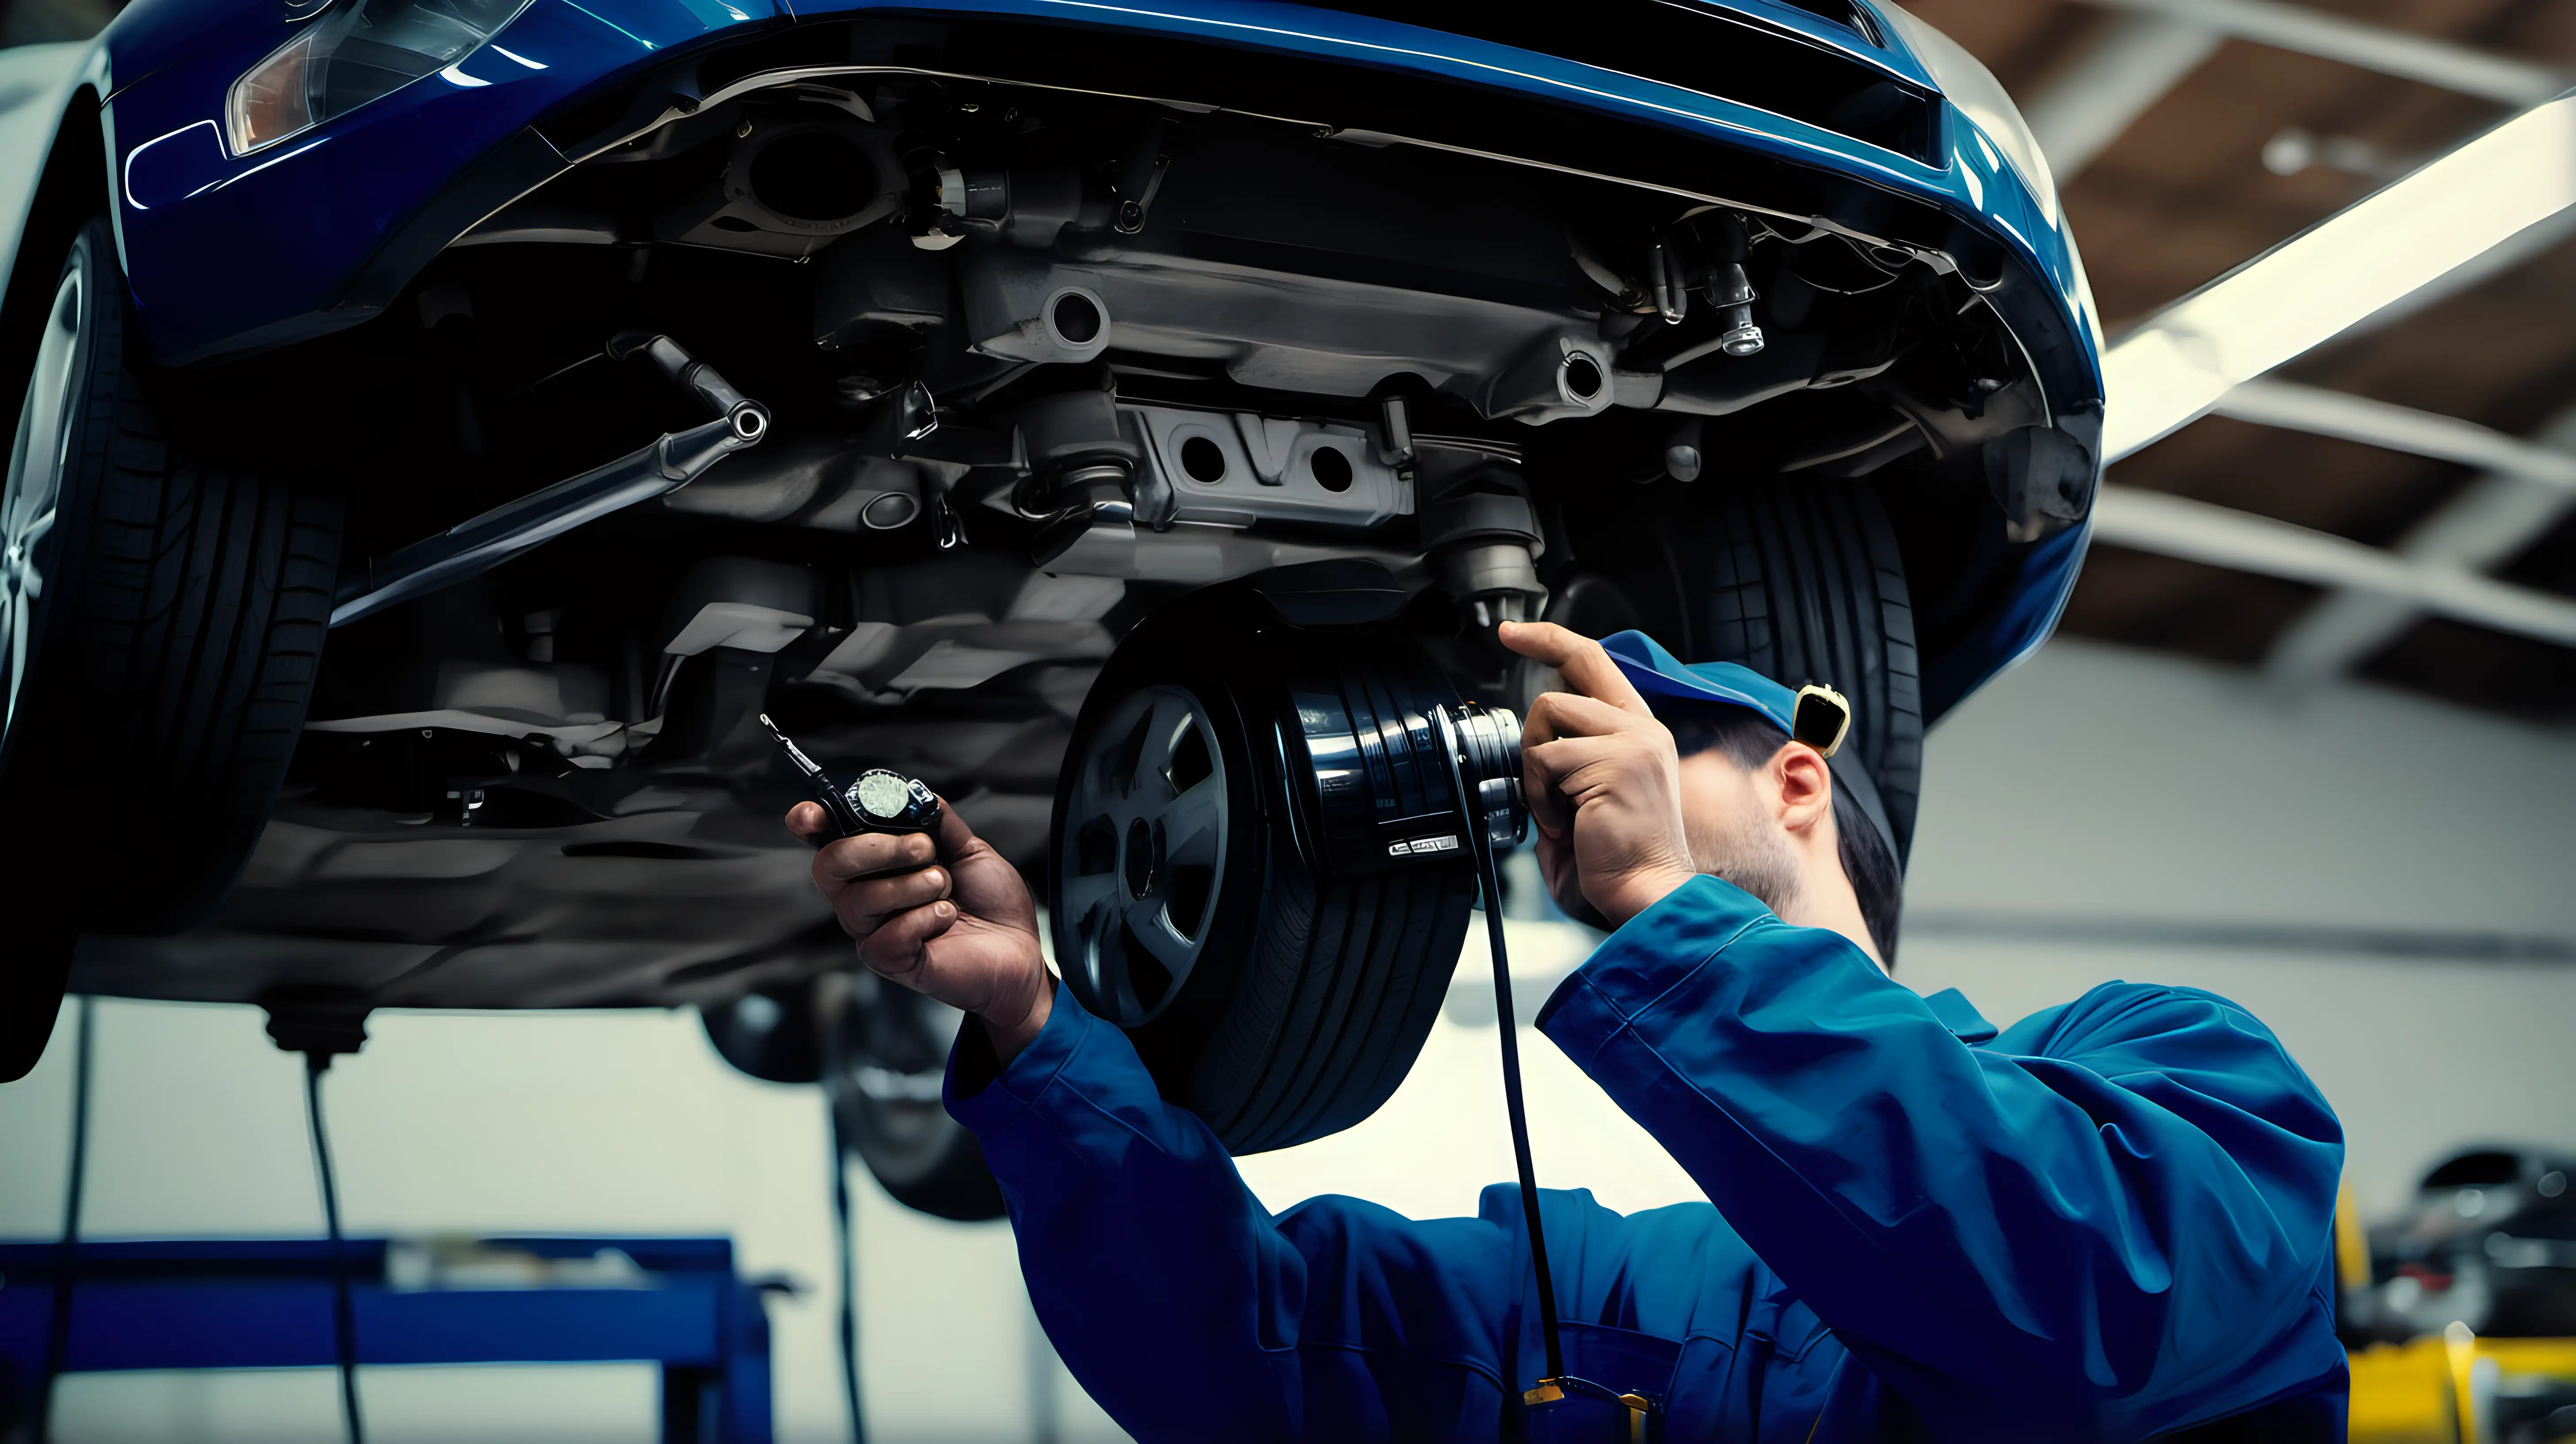 "Photograph the mechanic as they perform routine maintenance on the car, their expertise evident in every meticulous adjustment and inspection. Keep the camera at a distance to highlight the precision and attention to detail inherent in their craft."